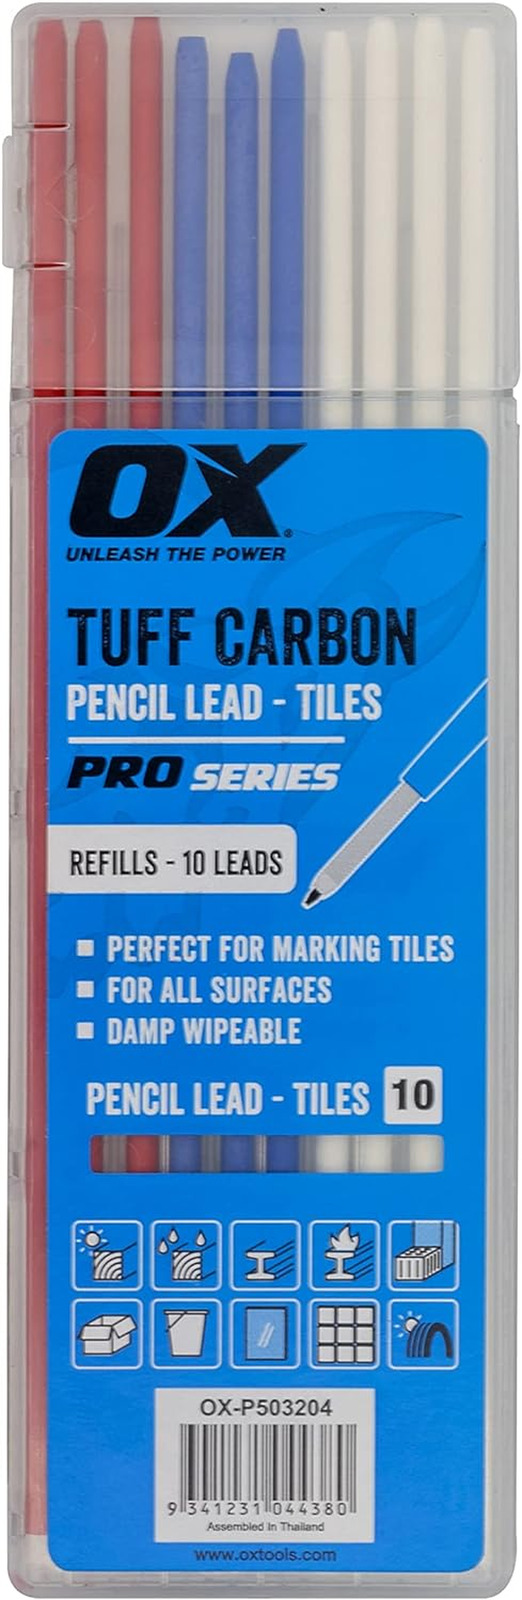 Tools Tuff Carbon Marking Pencil Replacement Lead 10-Pack with Red, Blue & White